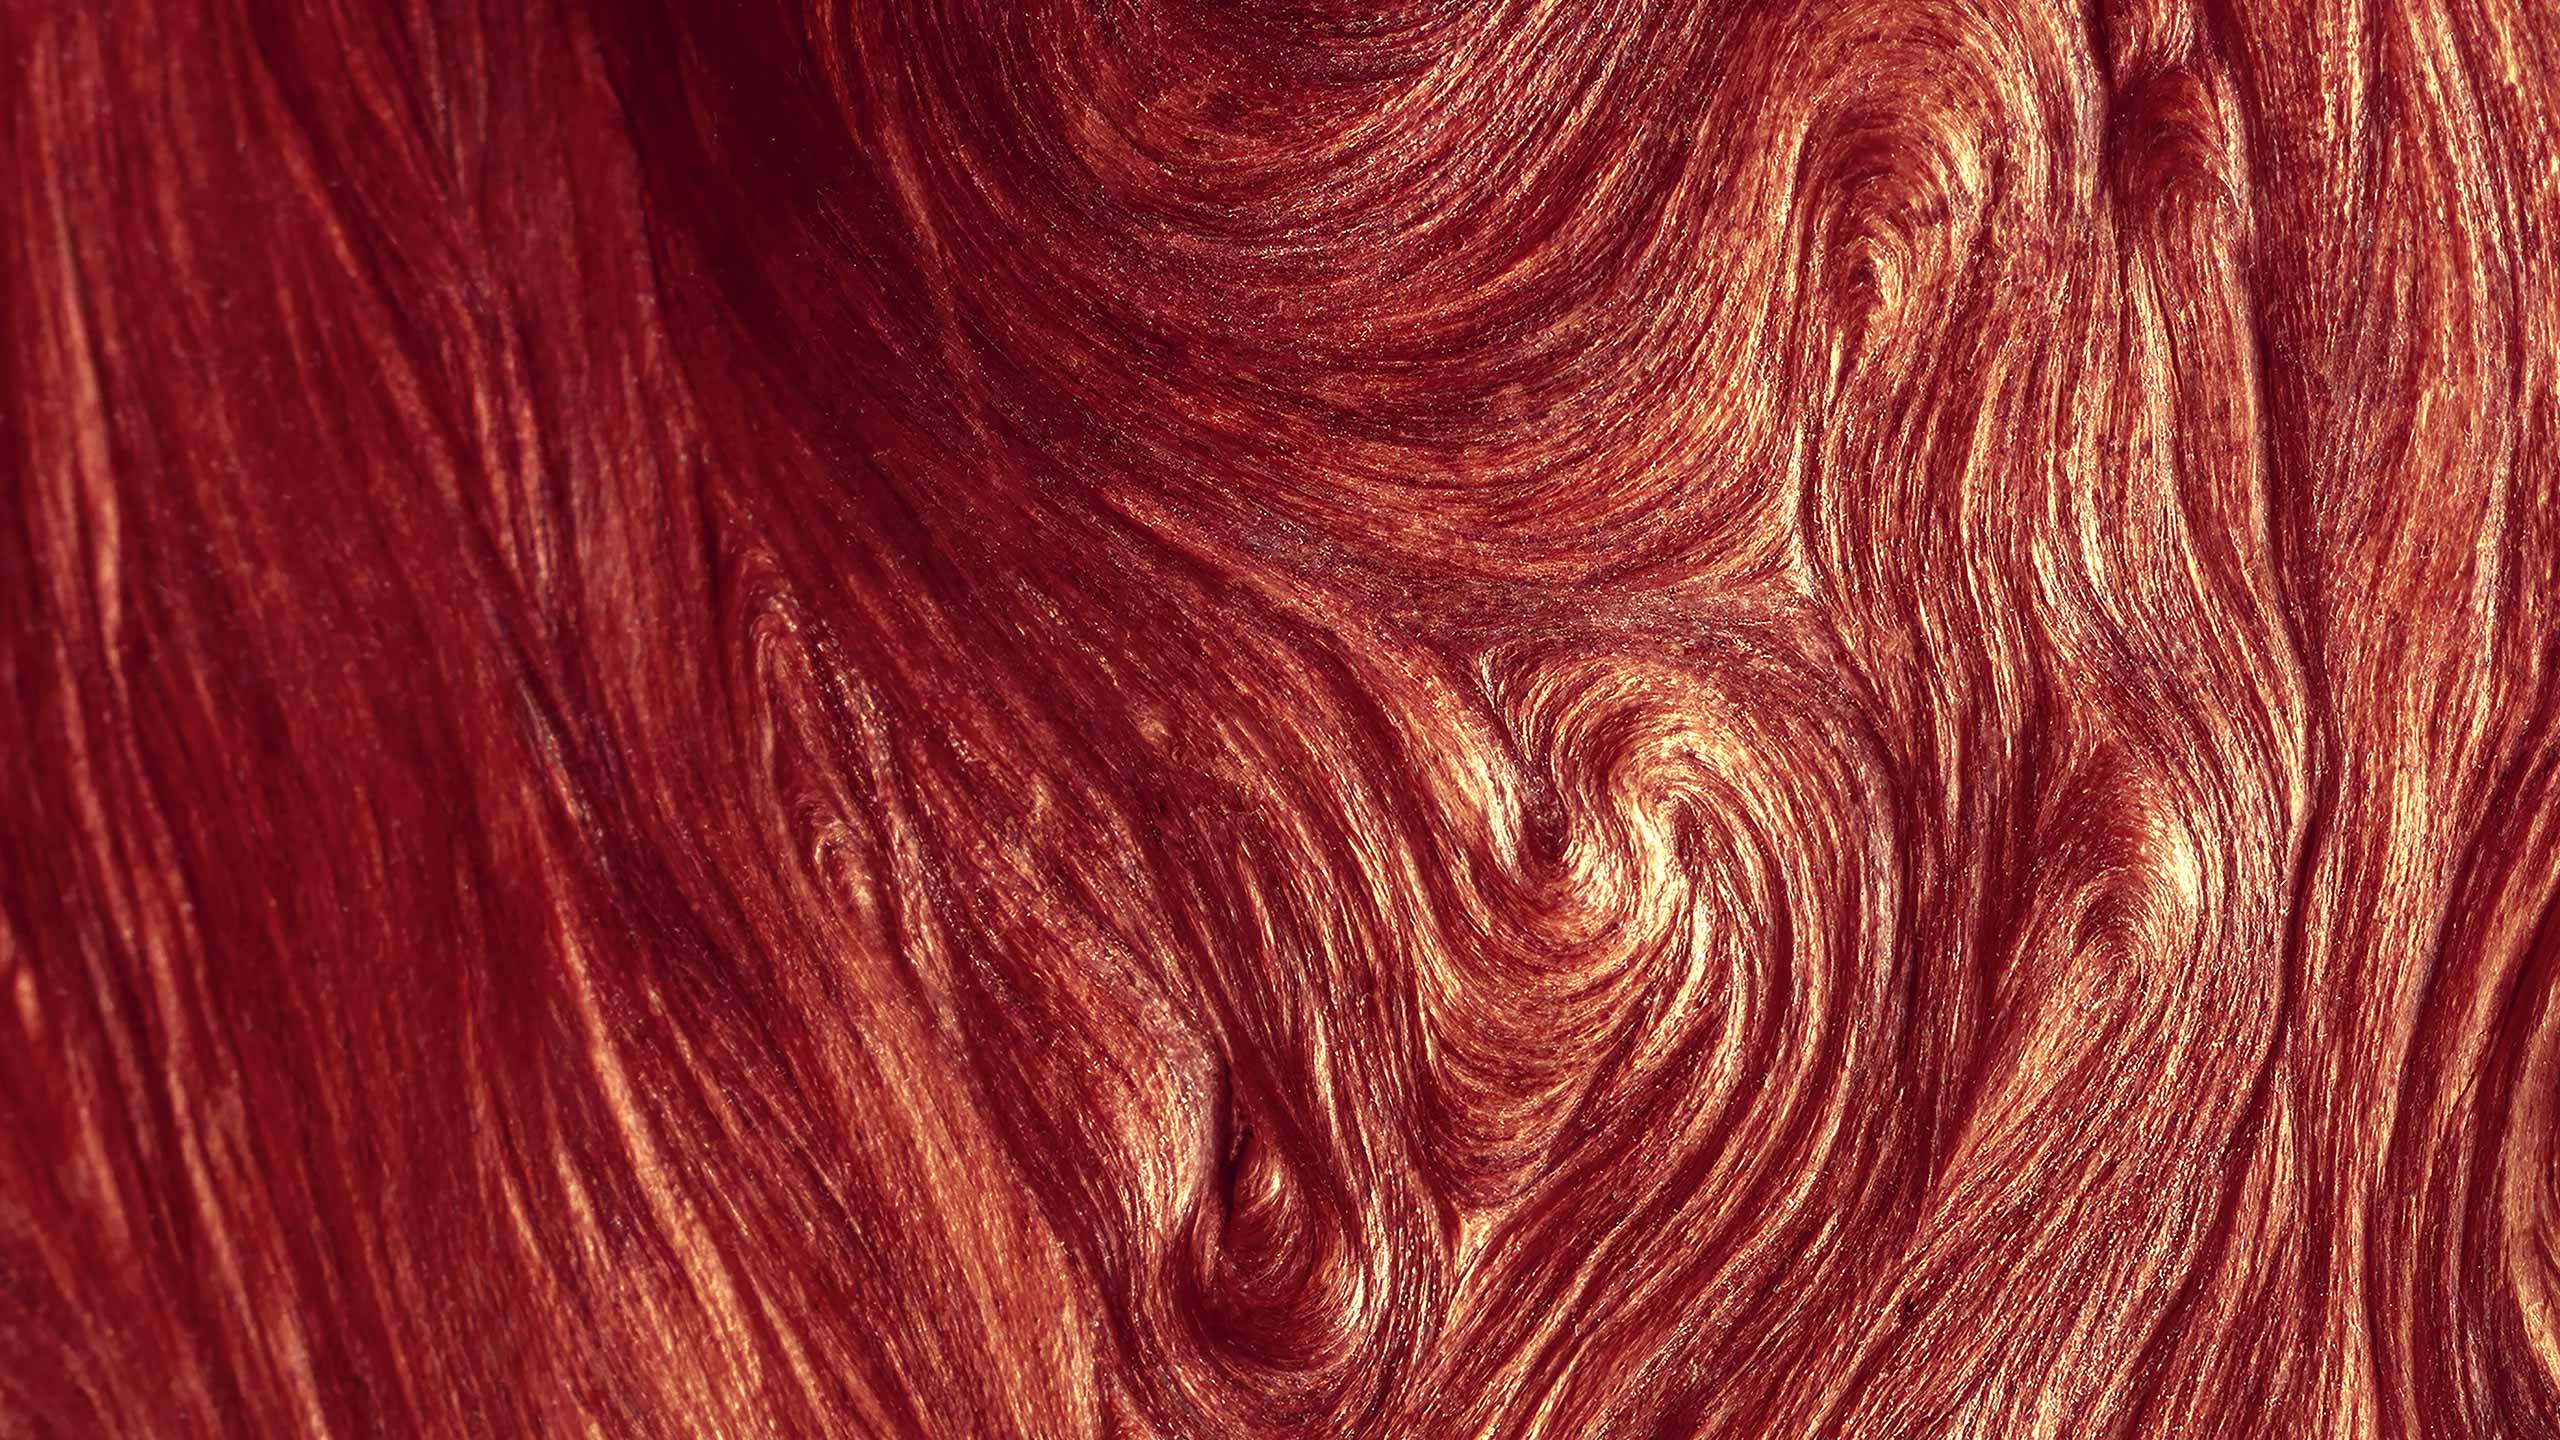 A swirling red texture.